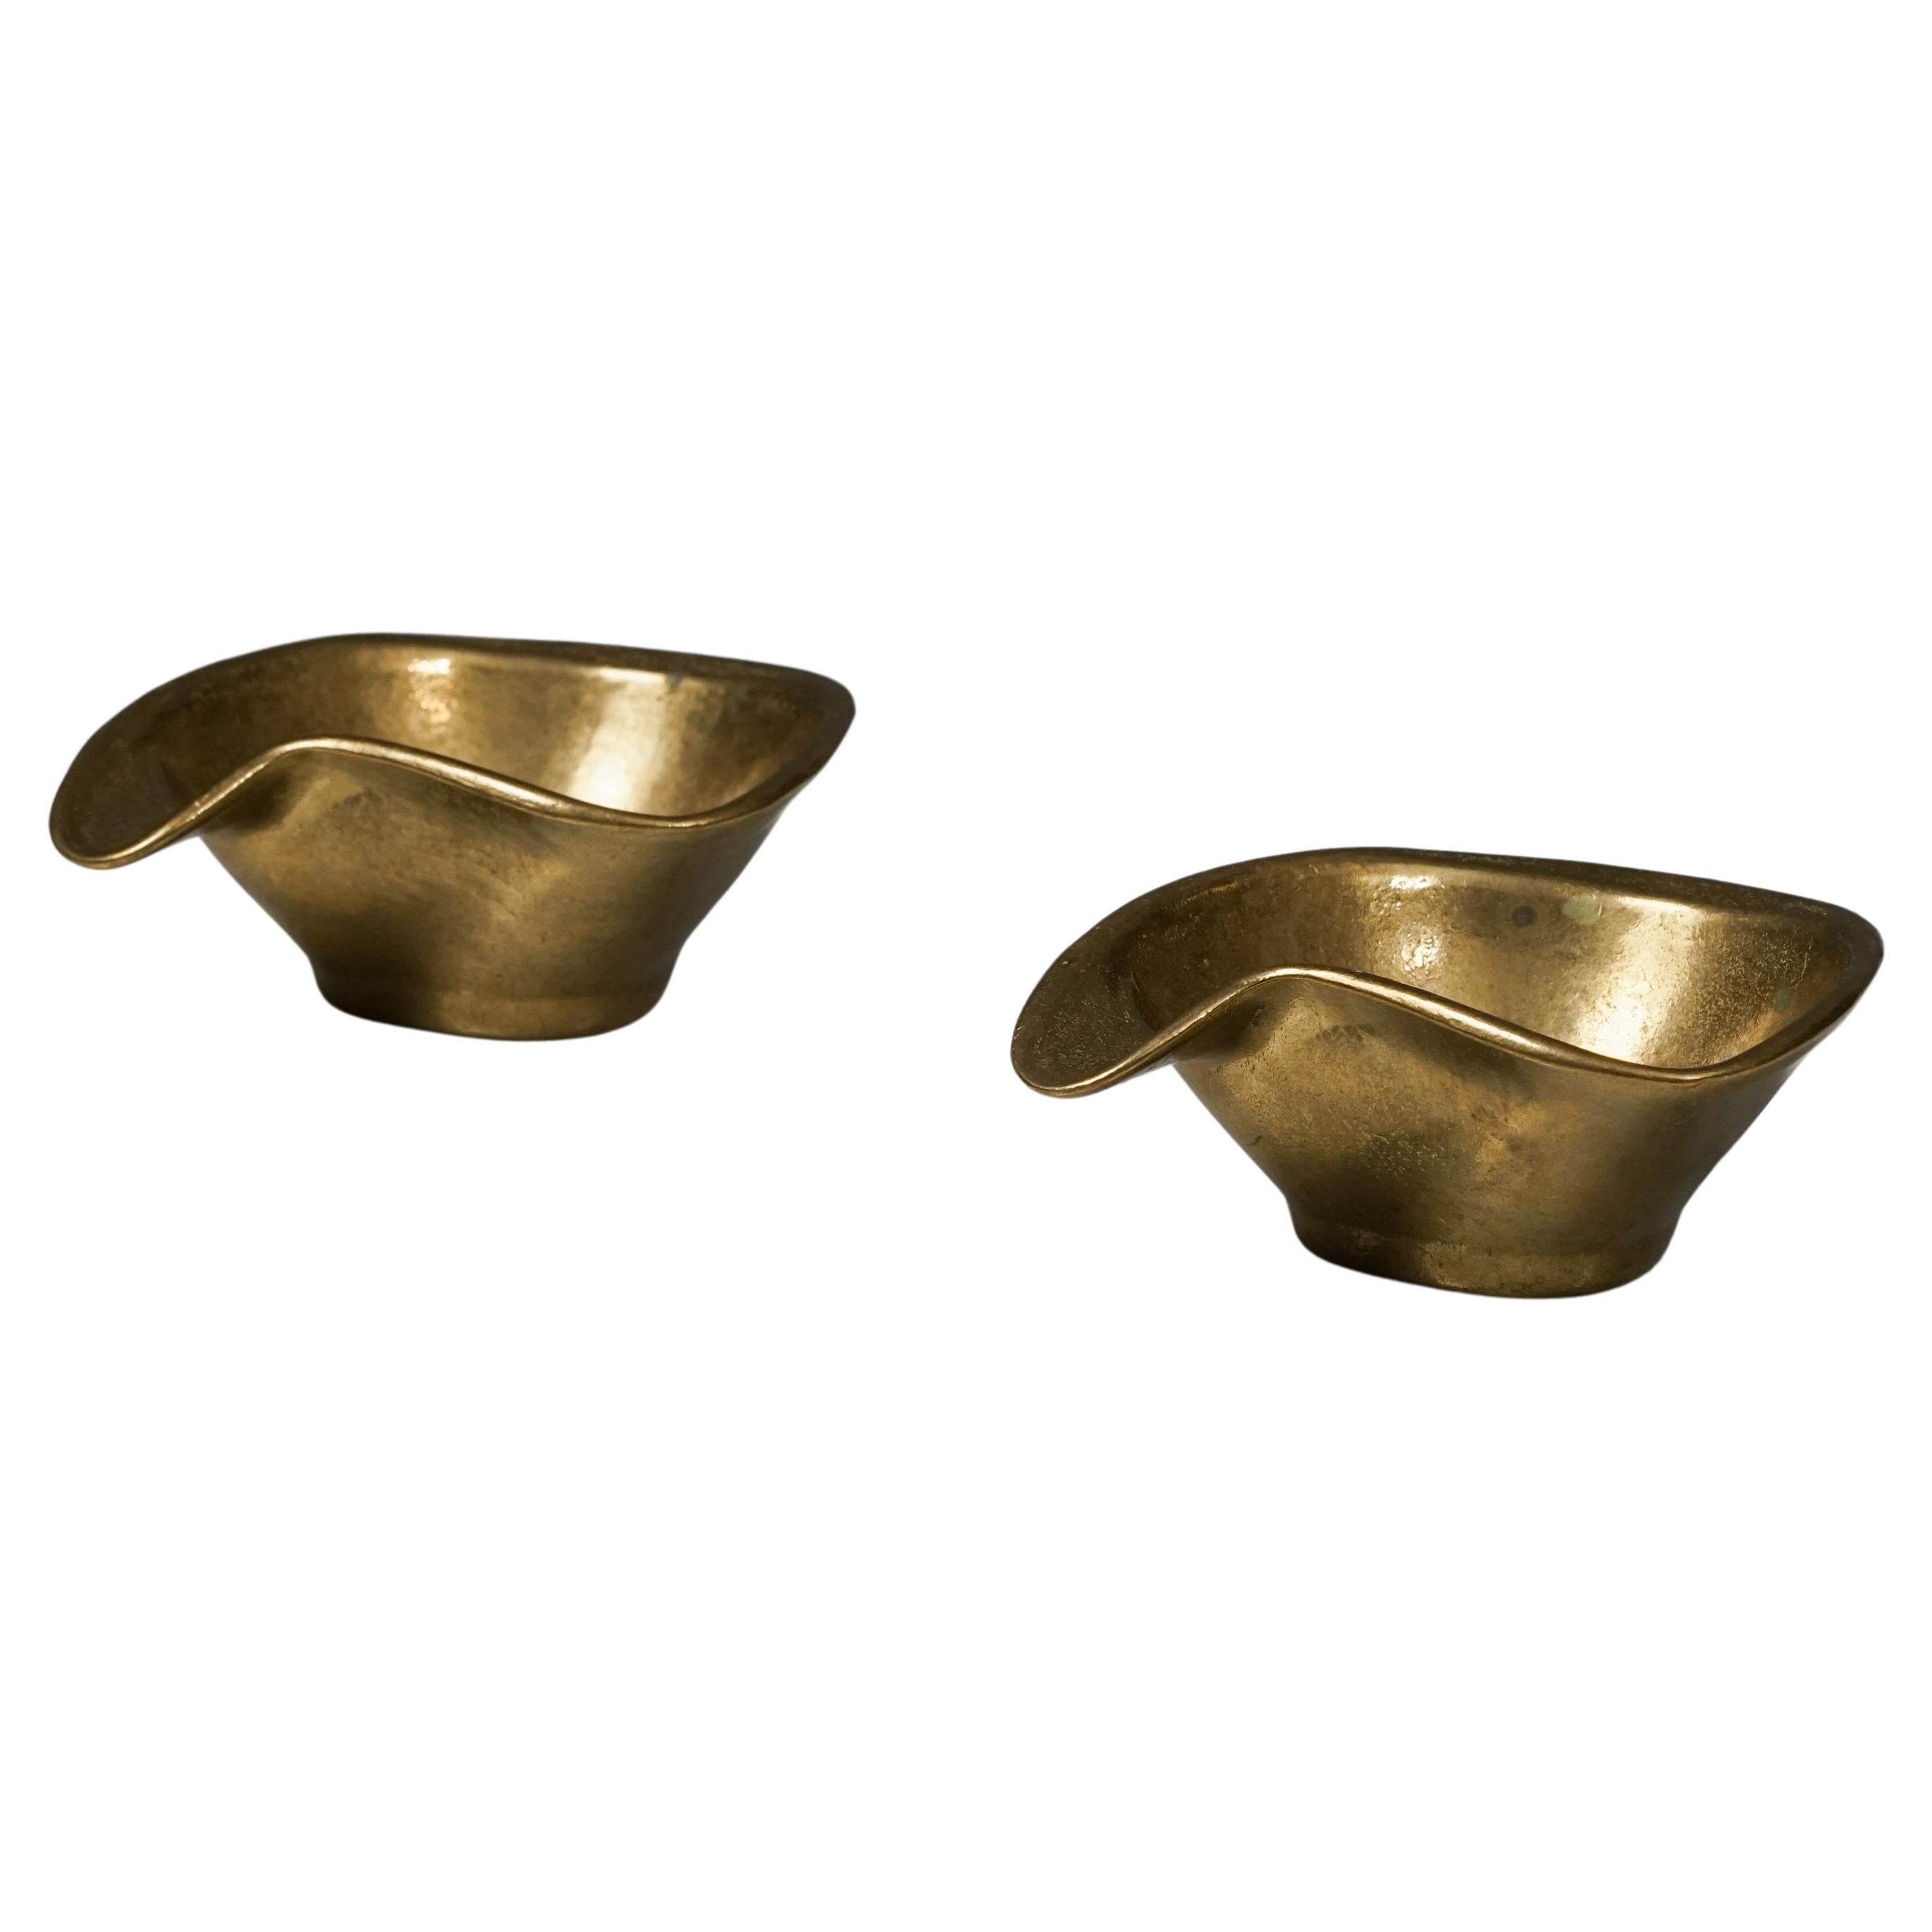 Set of Two Scandinavian Modern Nesting Brass Ashtrays from the, Mid-1900s For Sale